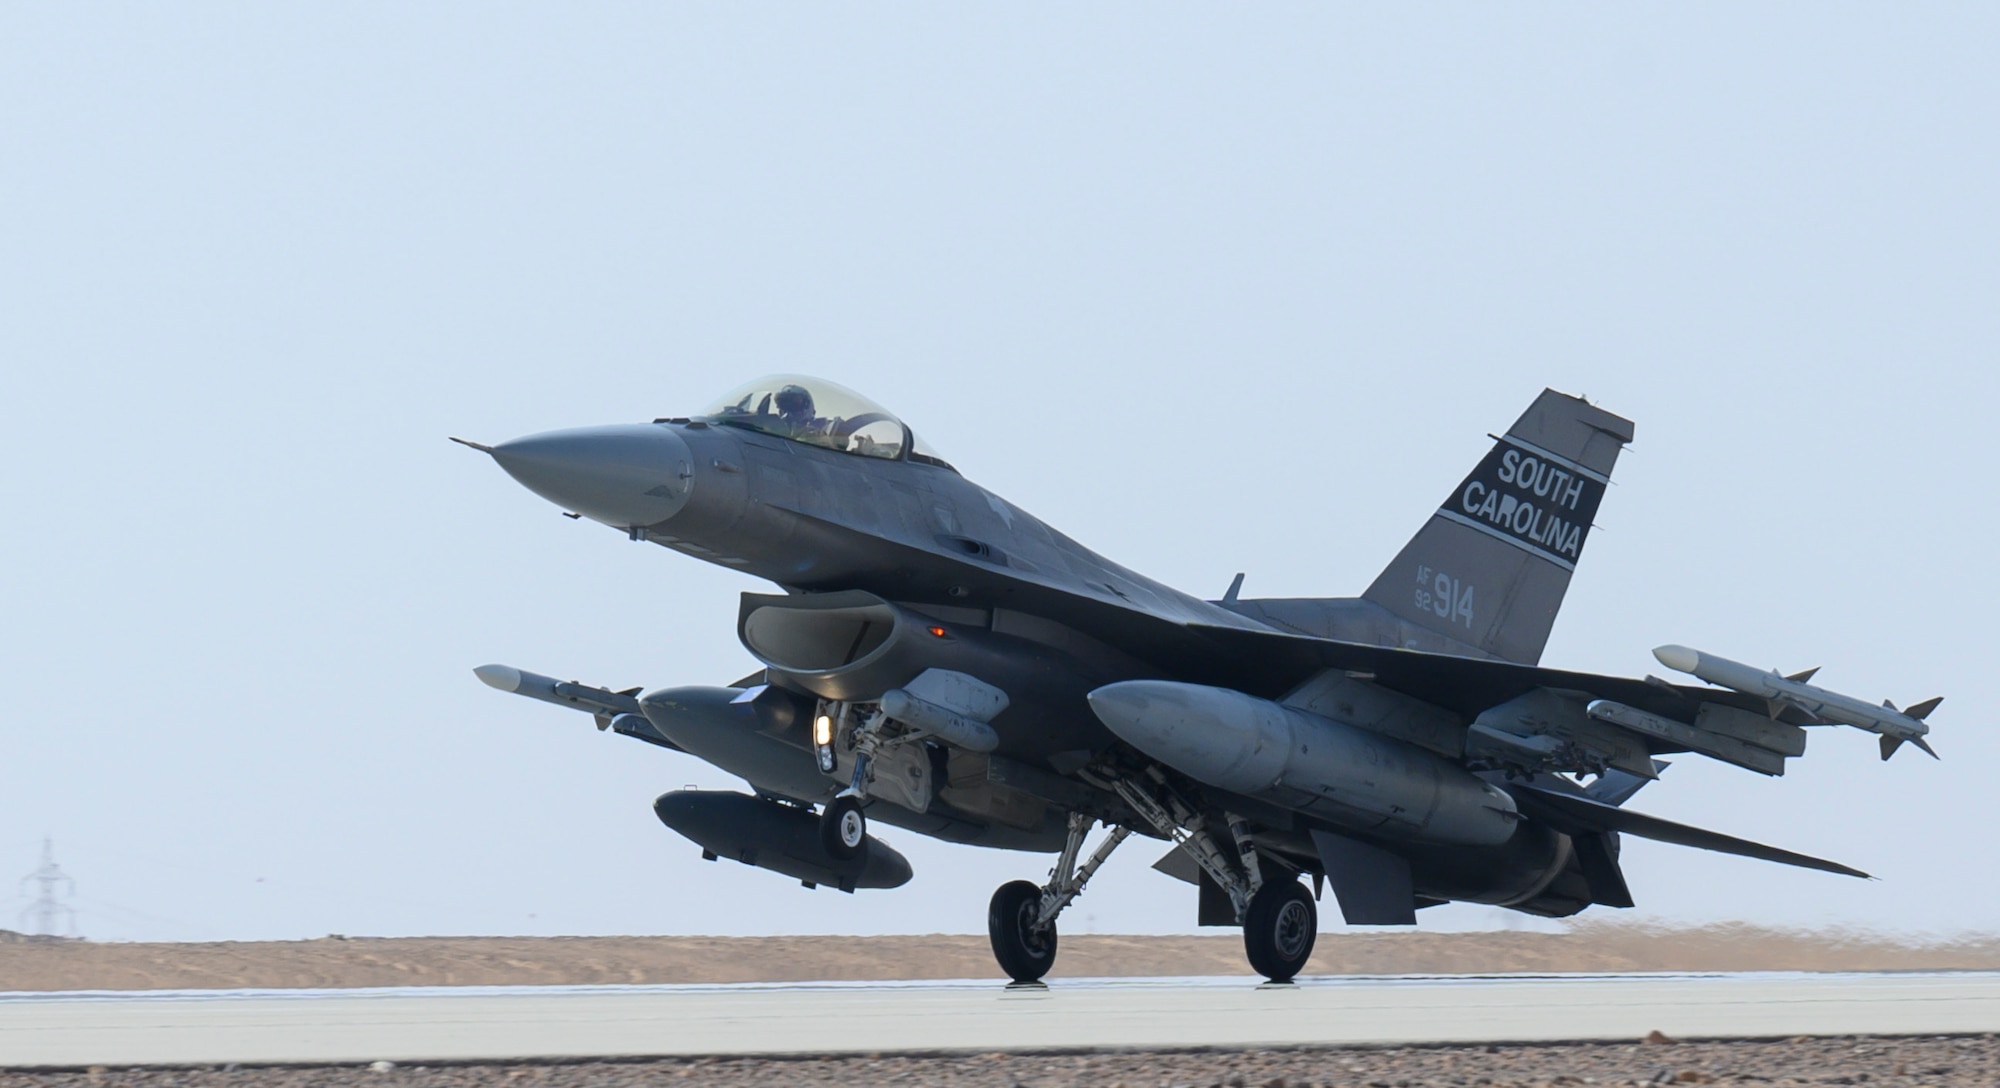 A U.S. Air Force F-16CJ Fighting Falcon from South Carolina Air National Guard’s 169th “Swamp Fox” Fighter Wing lands on the flight line at Prince Sultan Air Base, Kingdom of Saudi Arabia, April, 14, 2021. The Swamp Fox team has been deployed to PSAB to help bolster the defensive capabilities against potential threats in the region. (U.S. Air Force Photo by Senior Airman Samuel Earick)